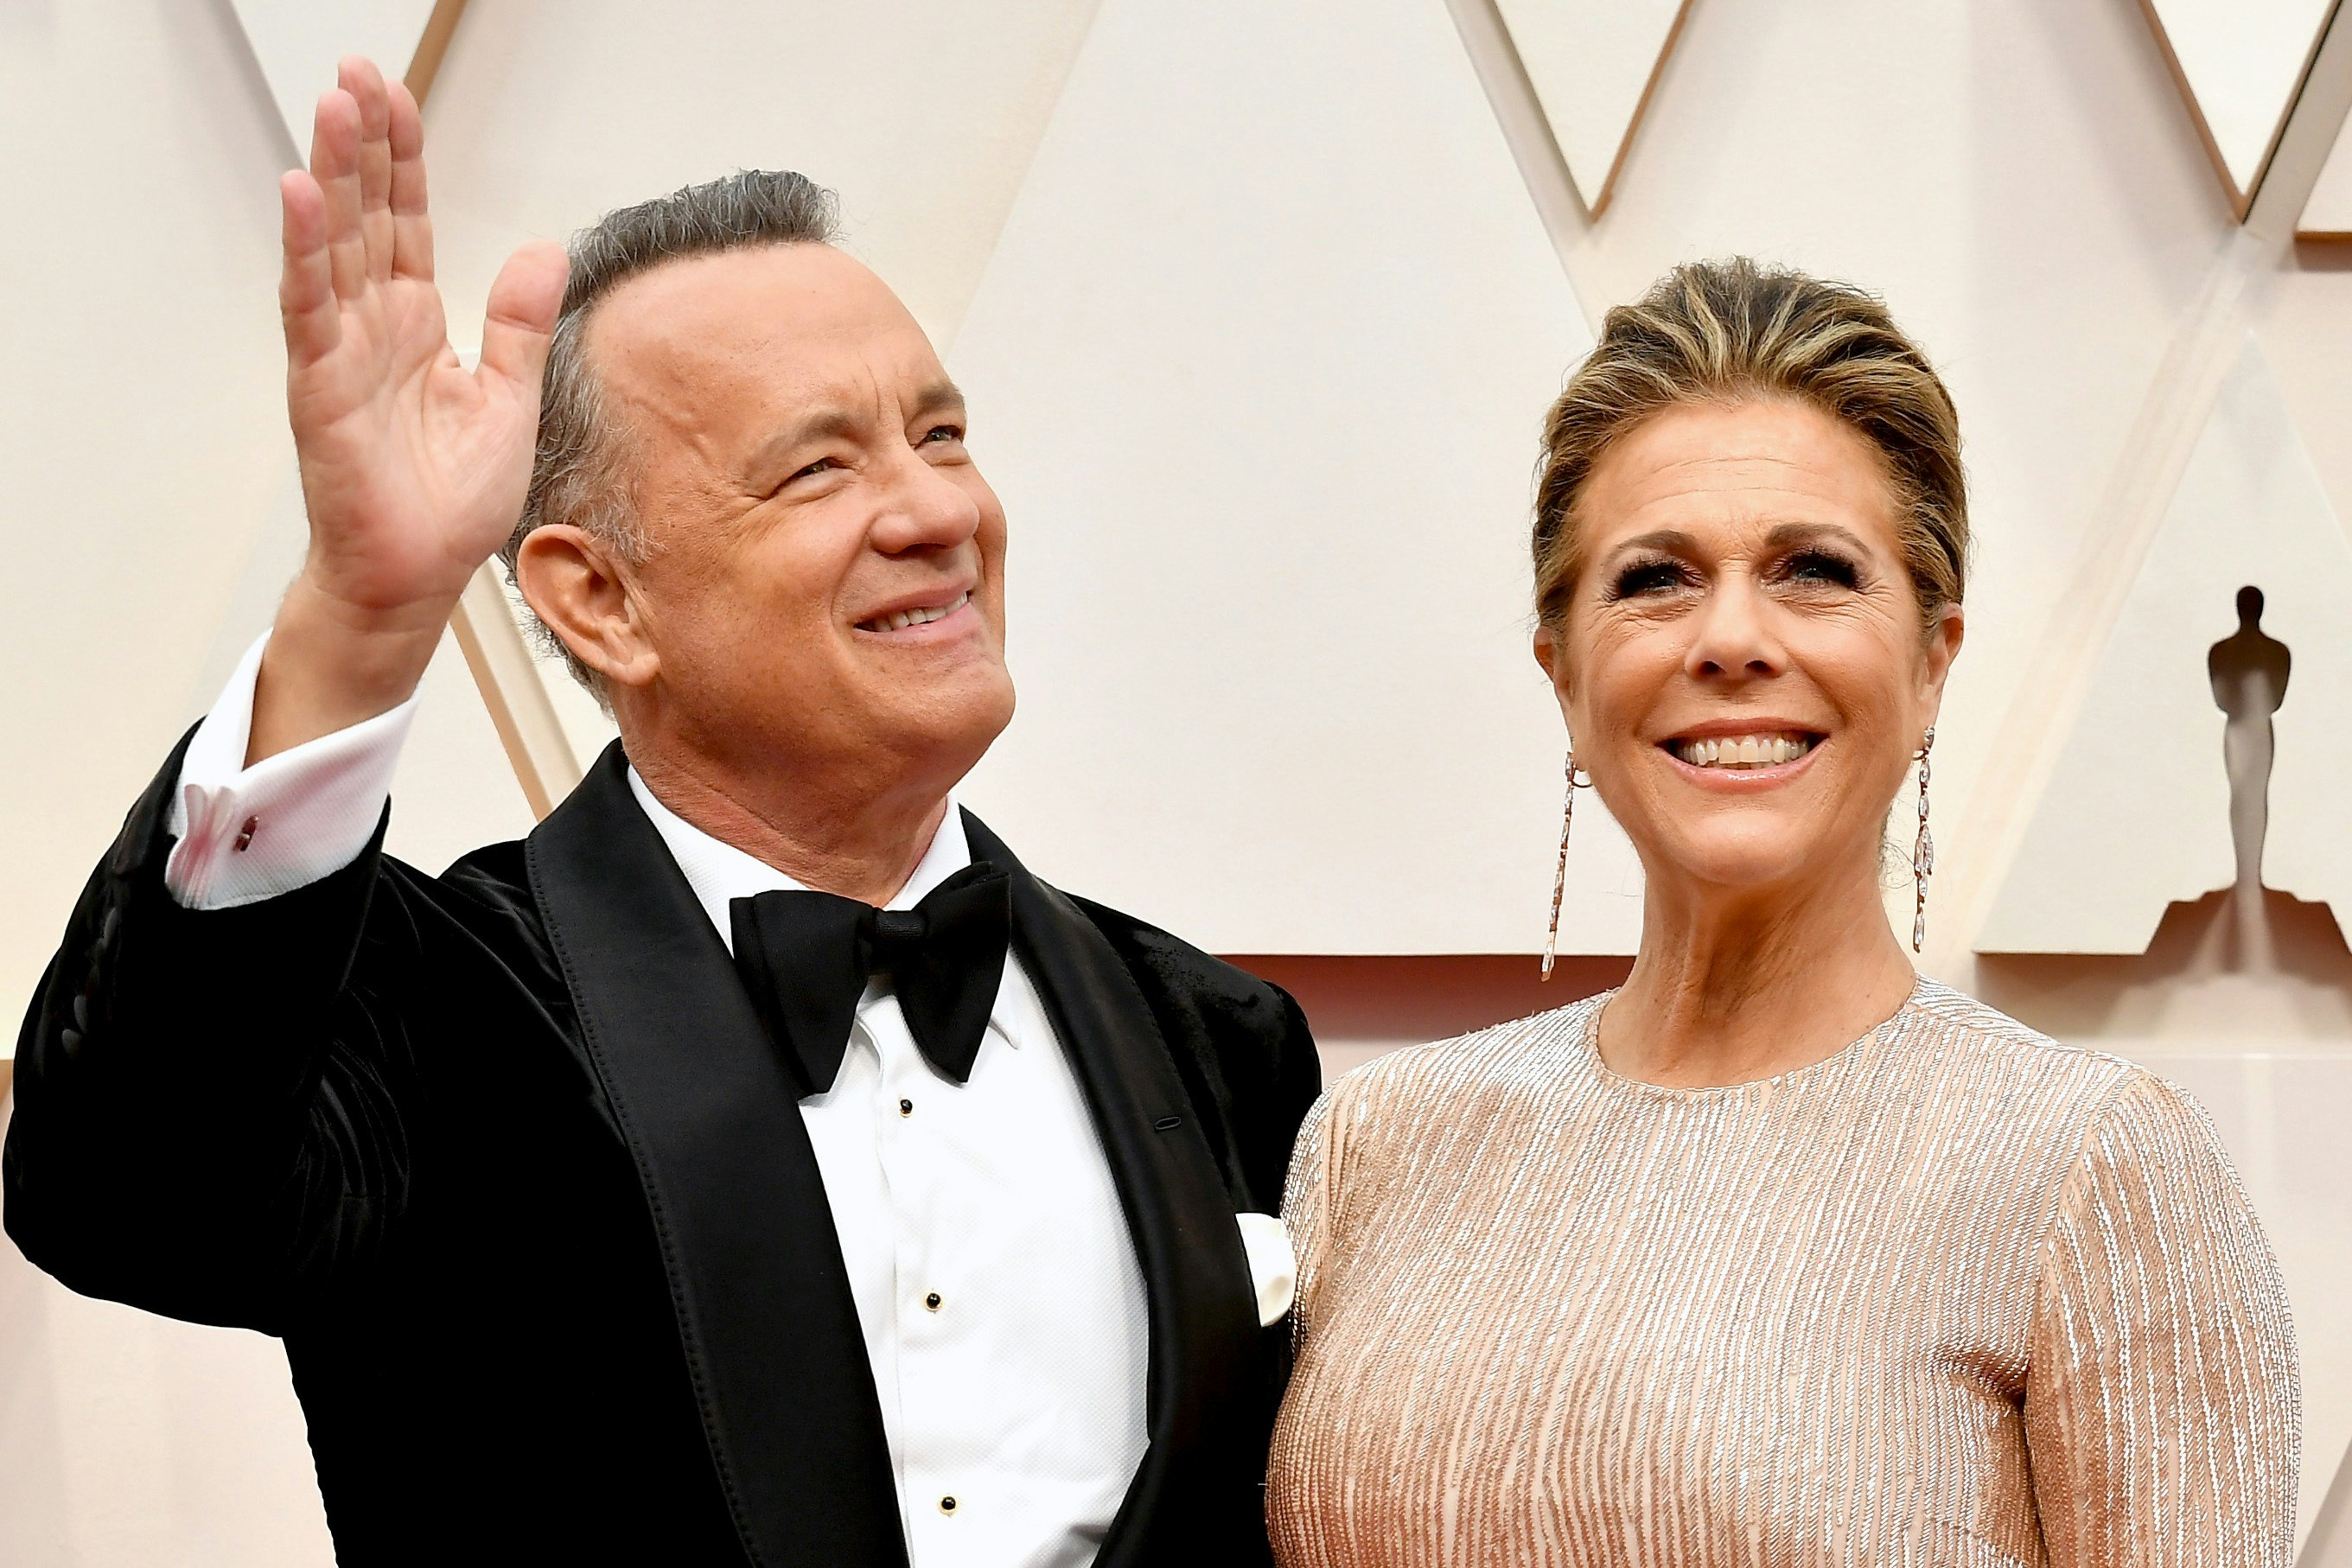 Tom Hanks and Rita Wilson at the 92nd Annual Academy Awards in February 2020 